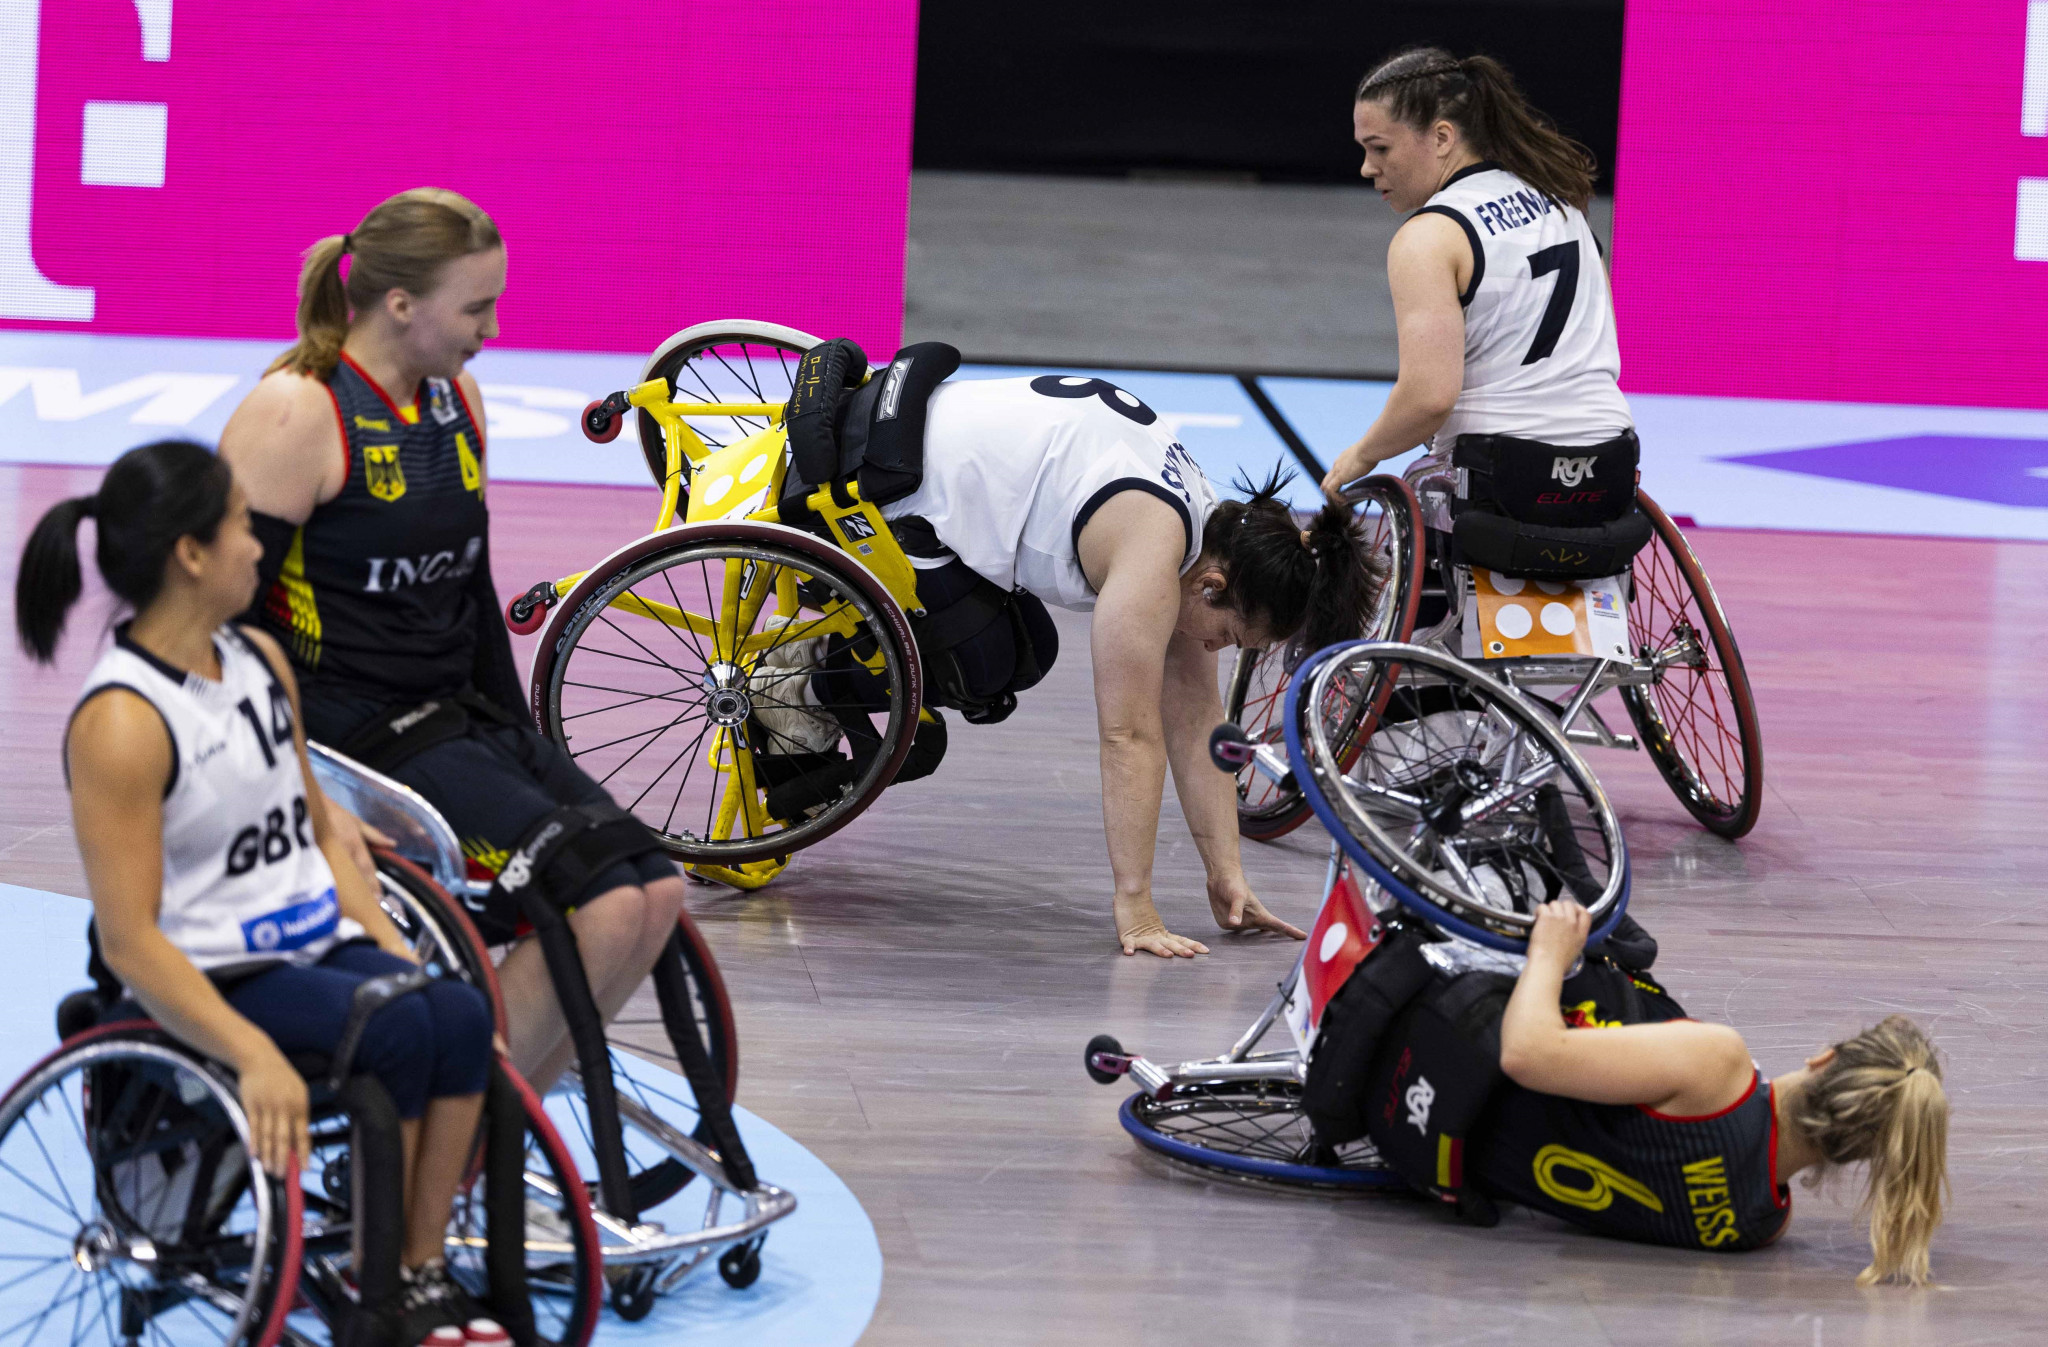 There were plenty of collision on the first day of wheelchair basketball action in Rotterdam  ©EPC